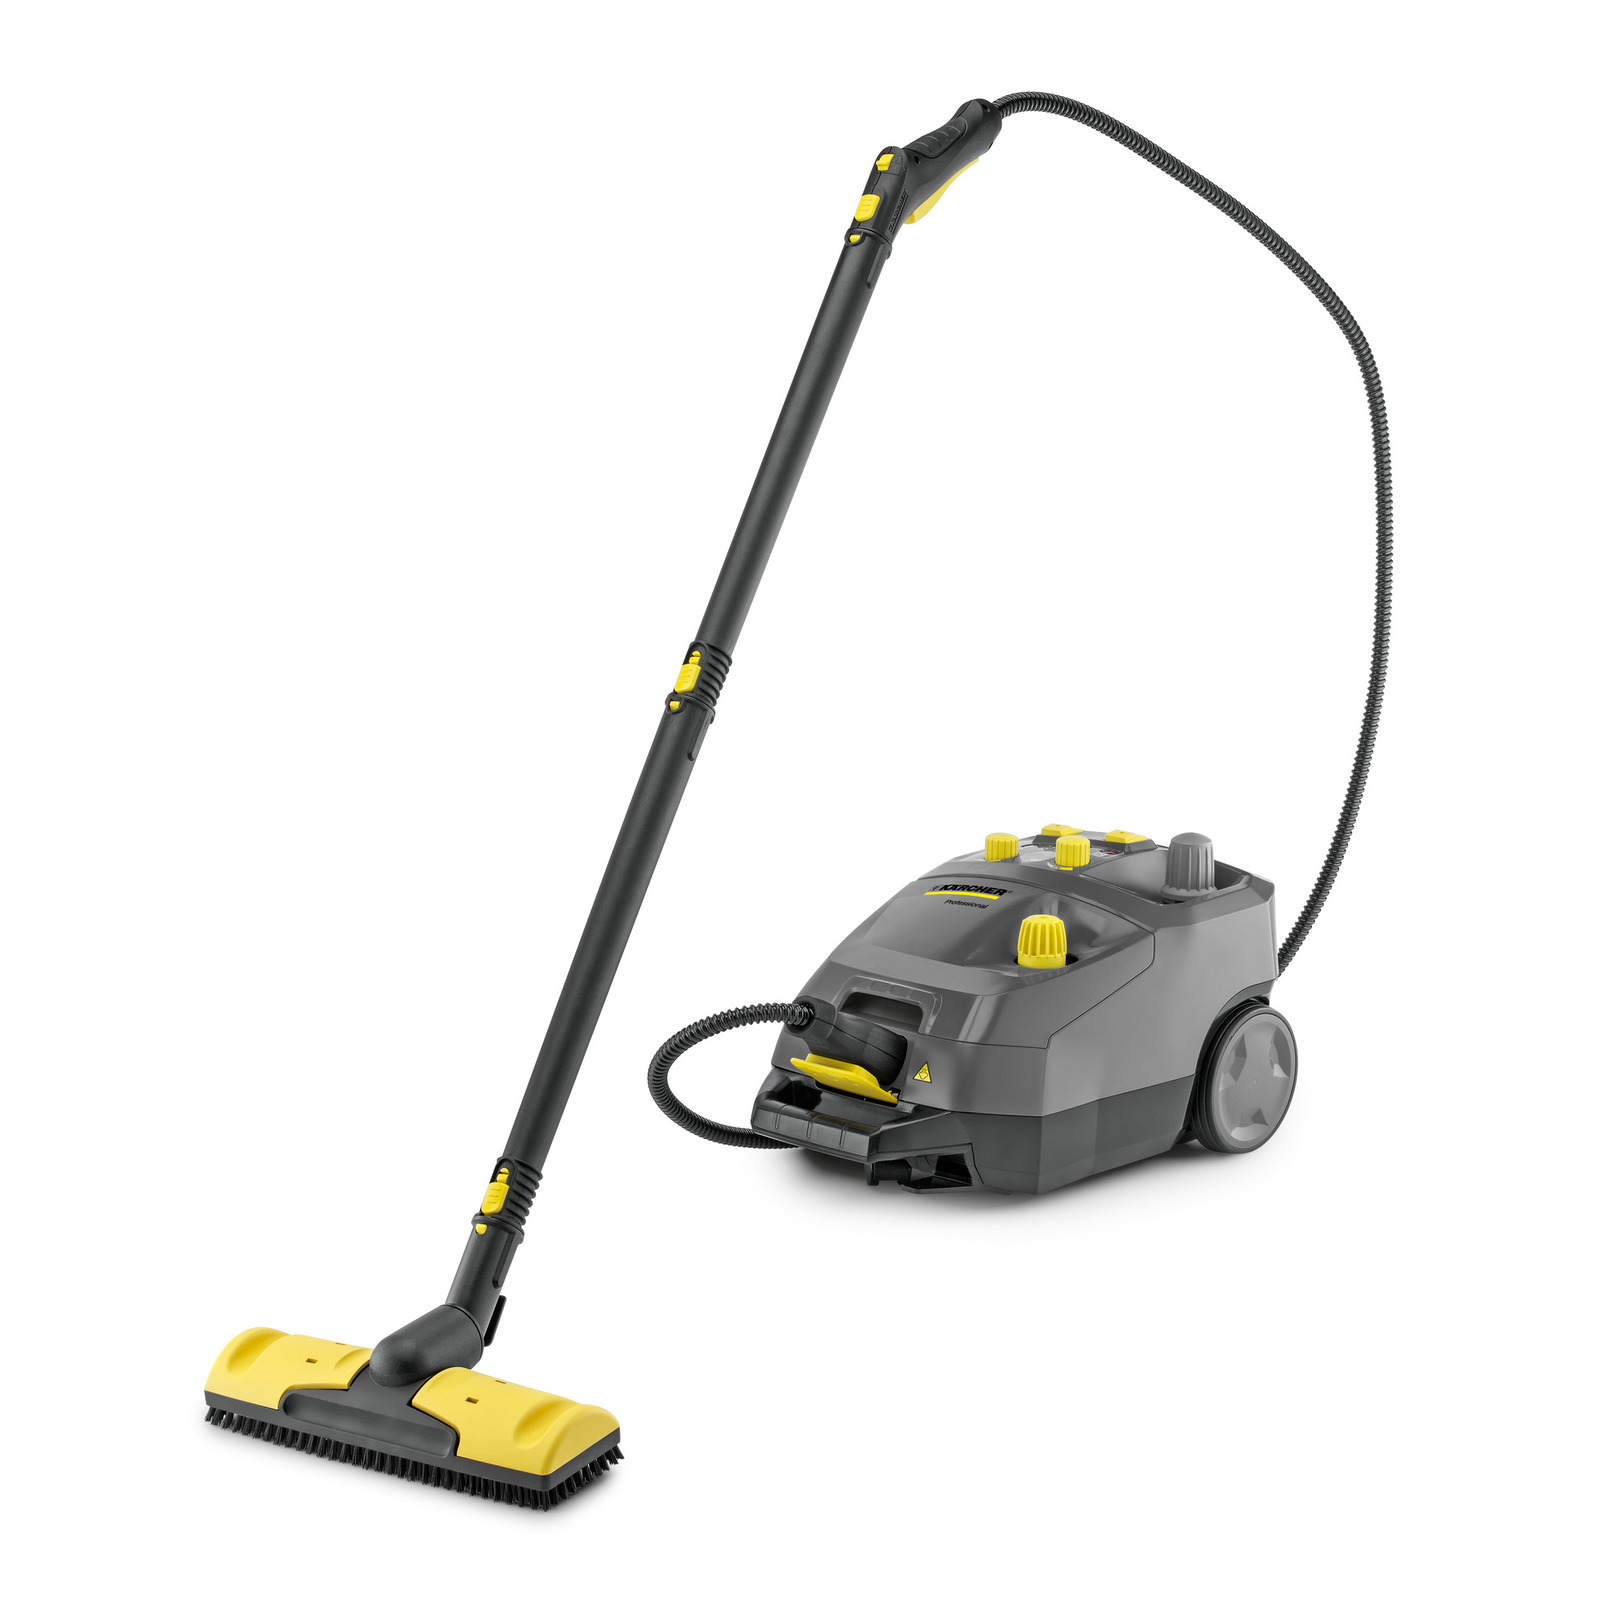 STEAM CLEANERS & STEAM VACUUM CLEANERS